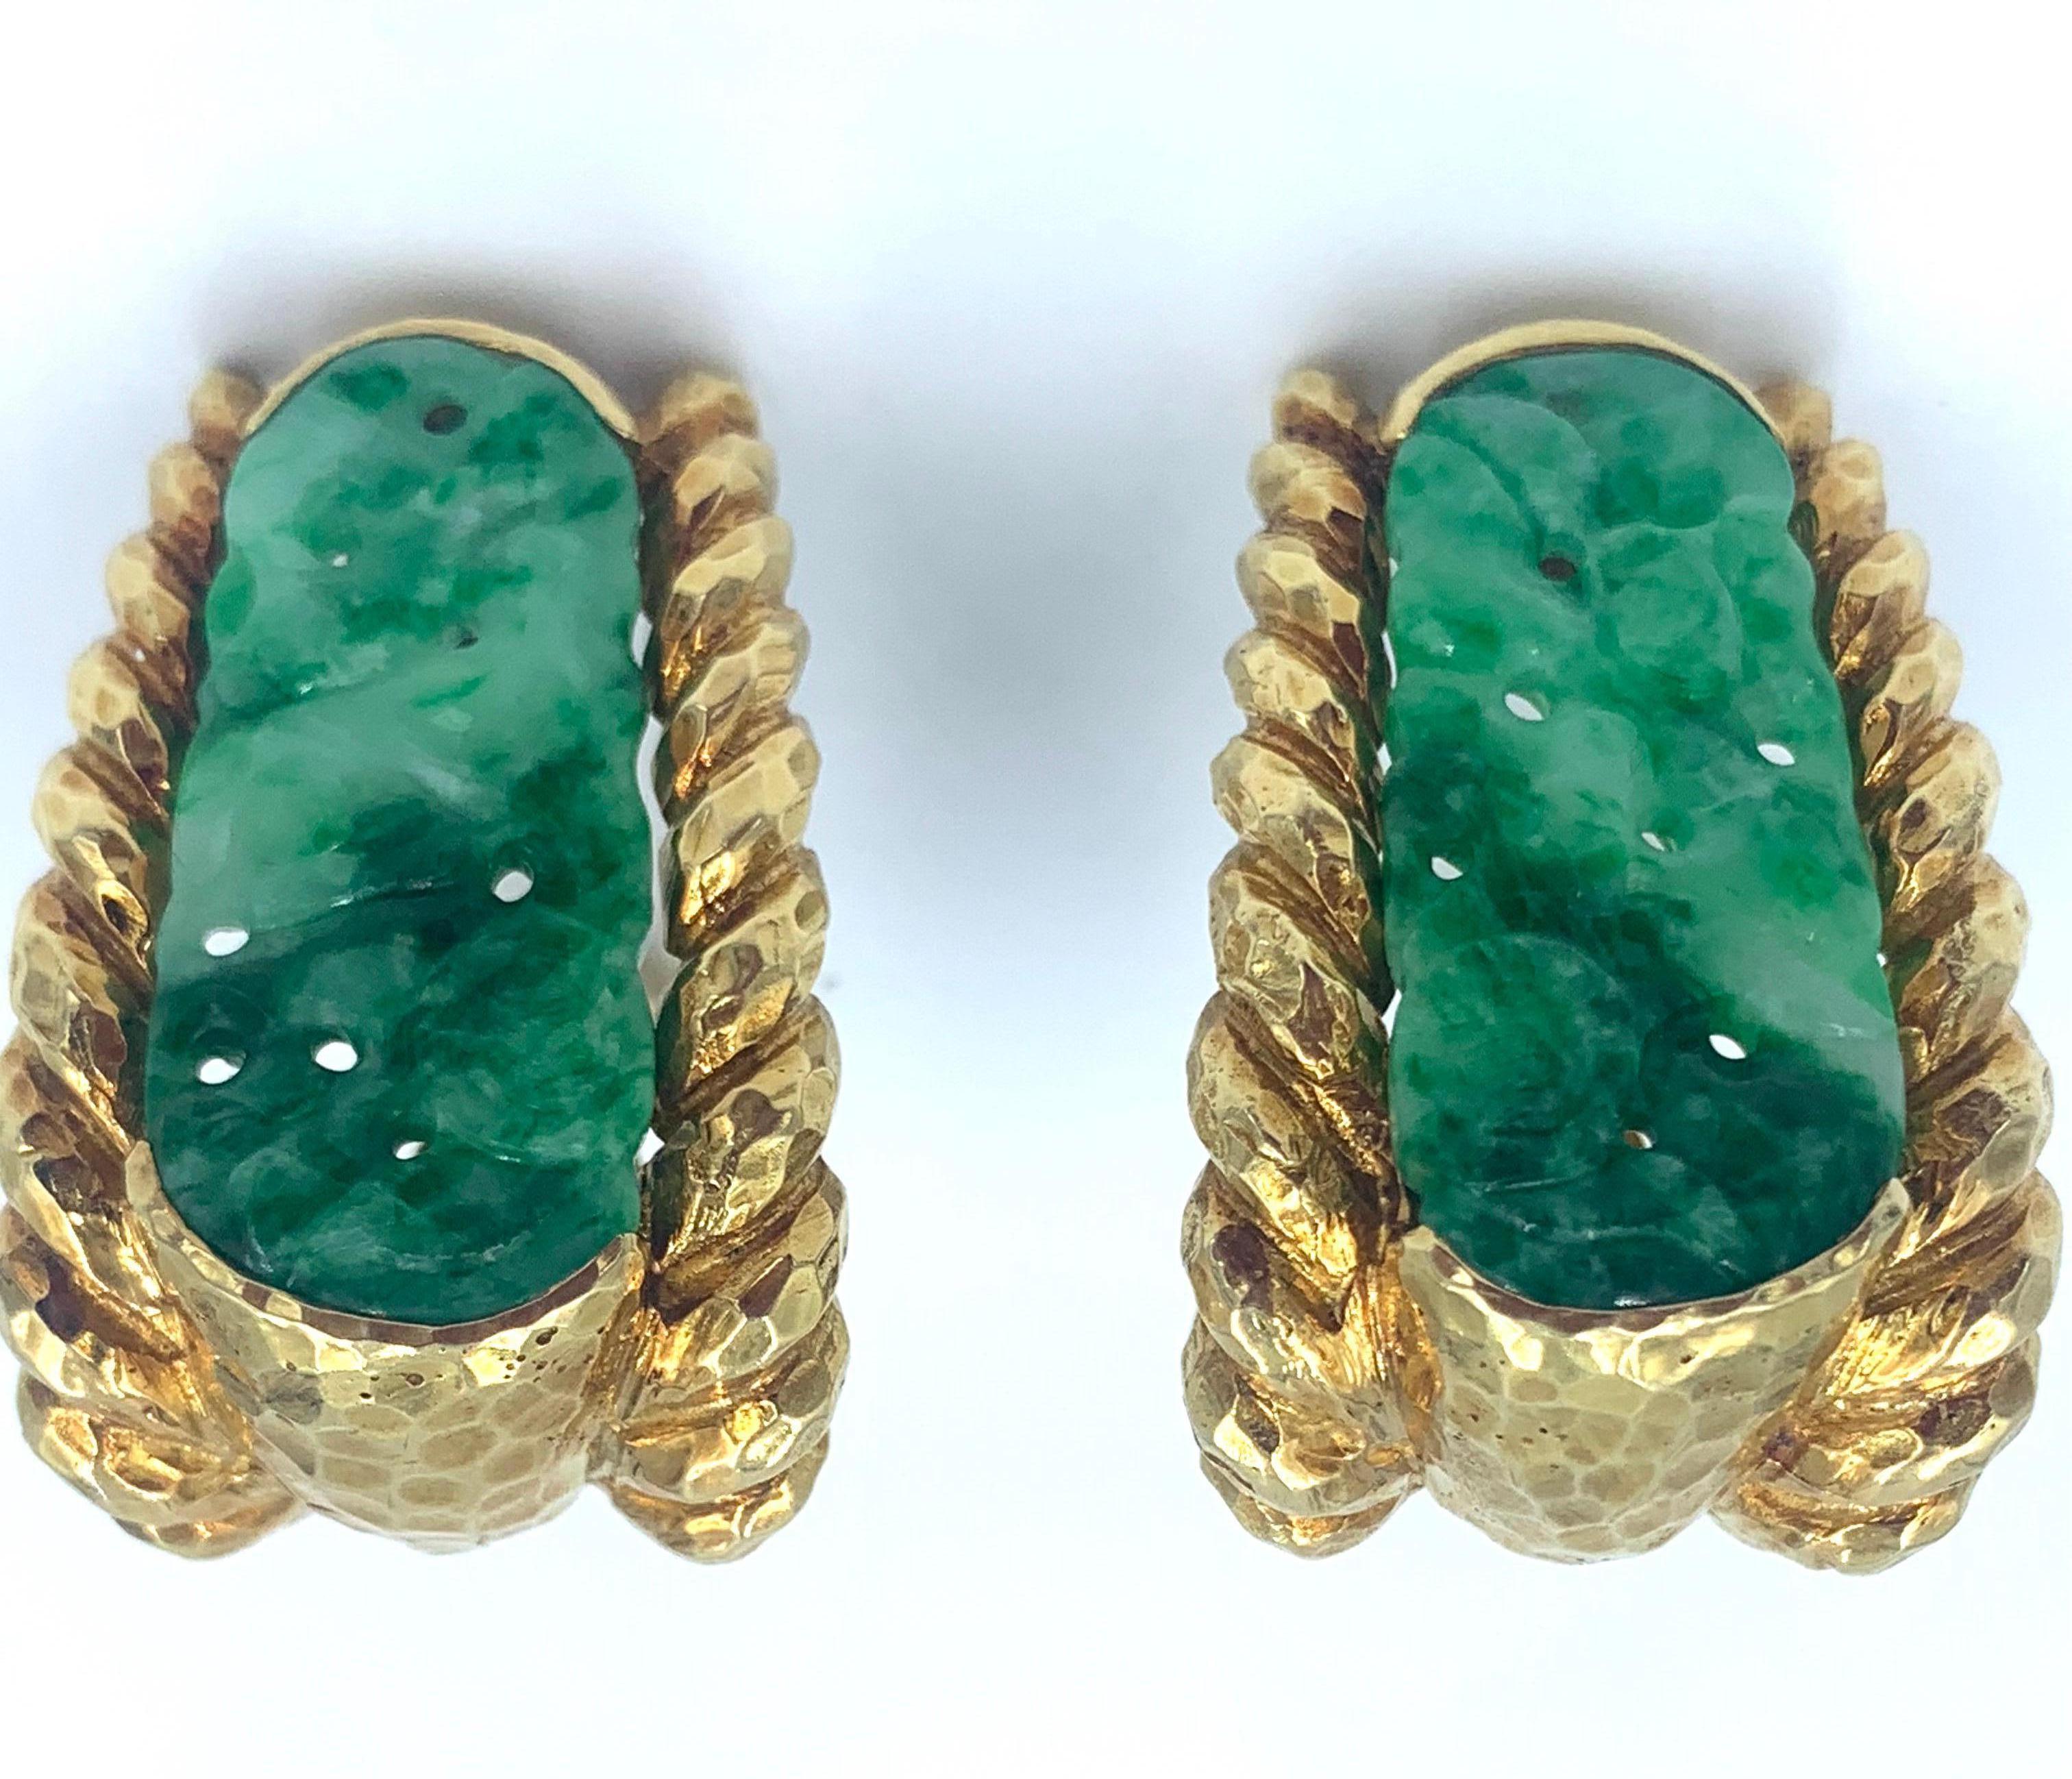  Hand hammered 18 karat yellow gold earrings set with carved and pierced jade. These earrings showcase exceptional  attention to detail. Created by David Webb.
Signed Webb 